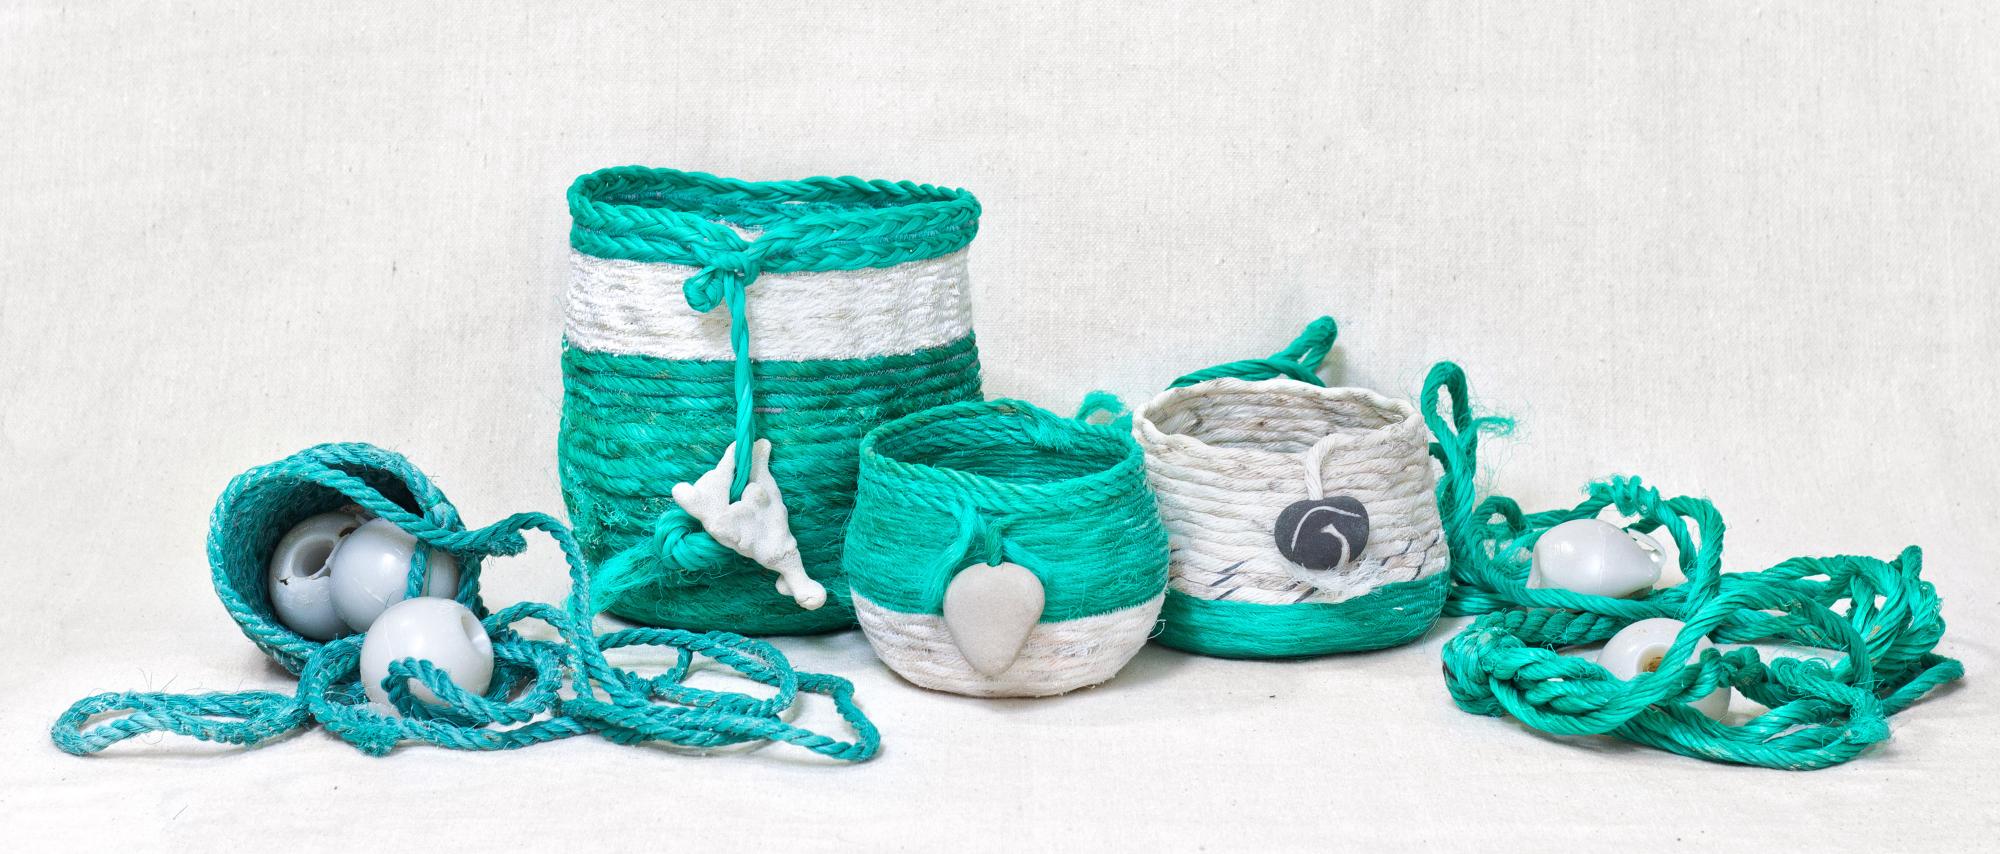 baskets woven by Emily Miller